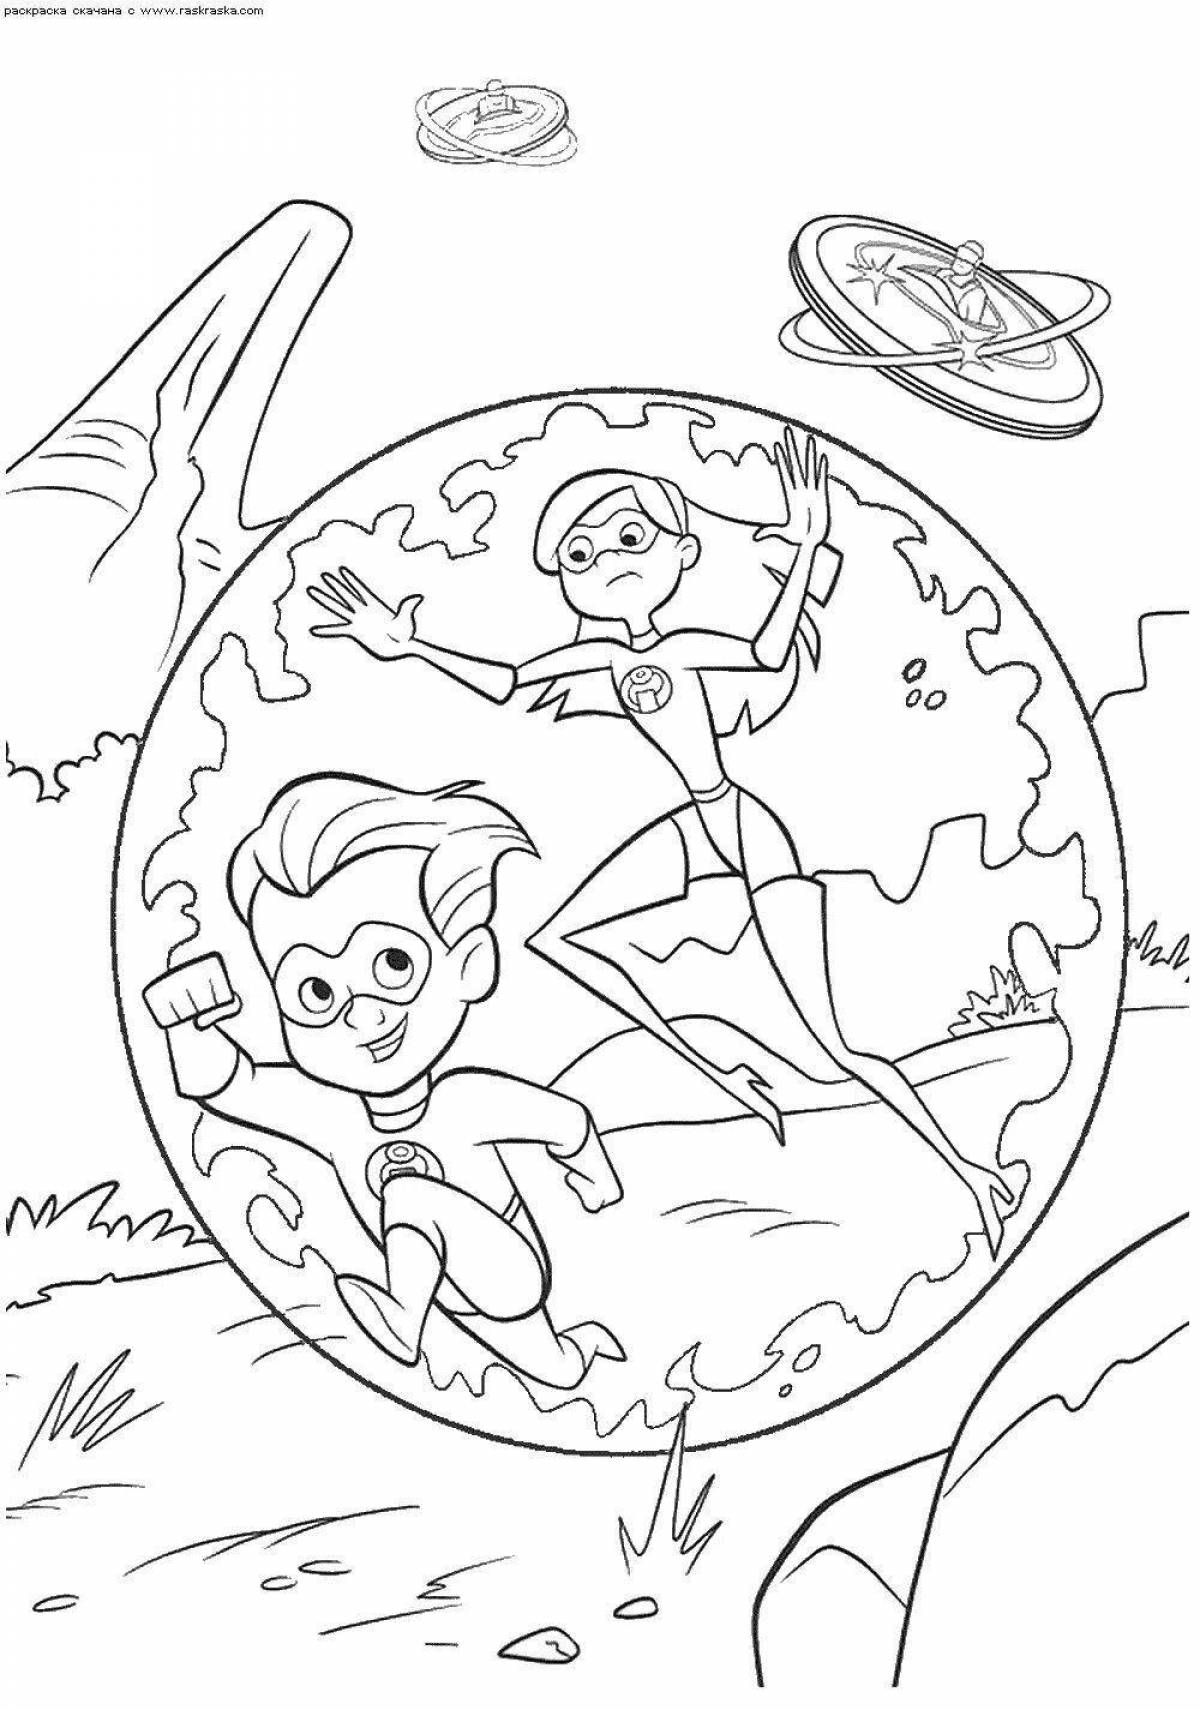 Adorable The Incredibles Coloring Book for Kids